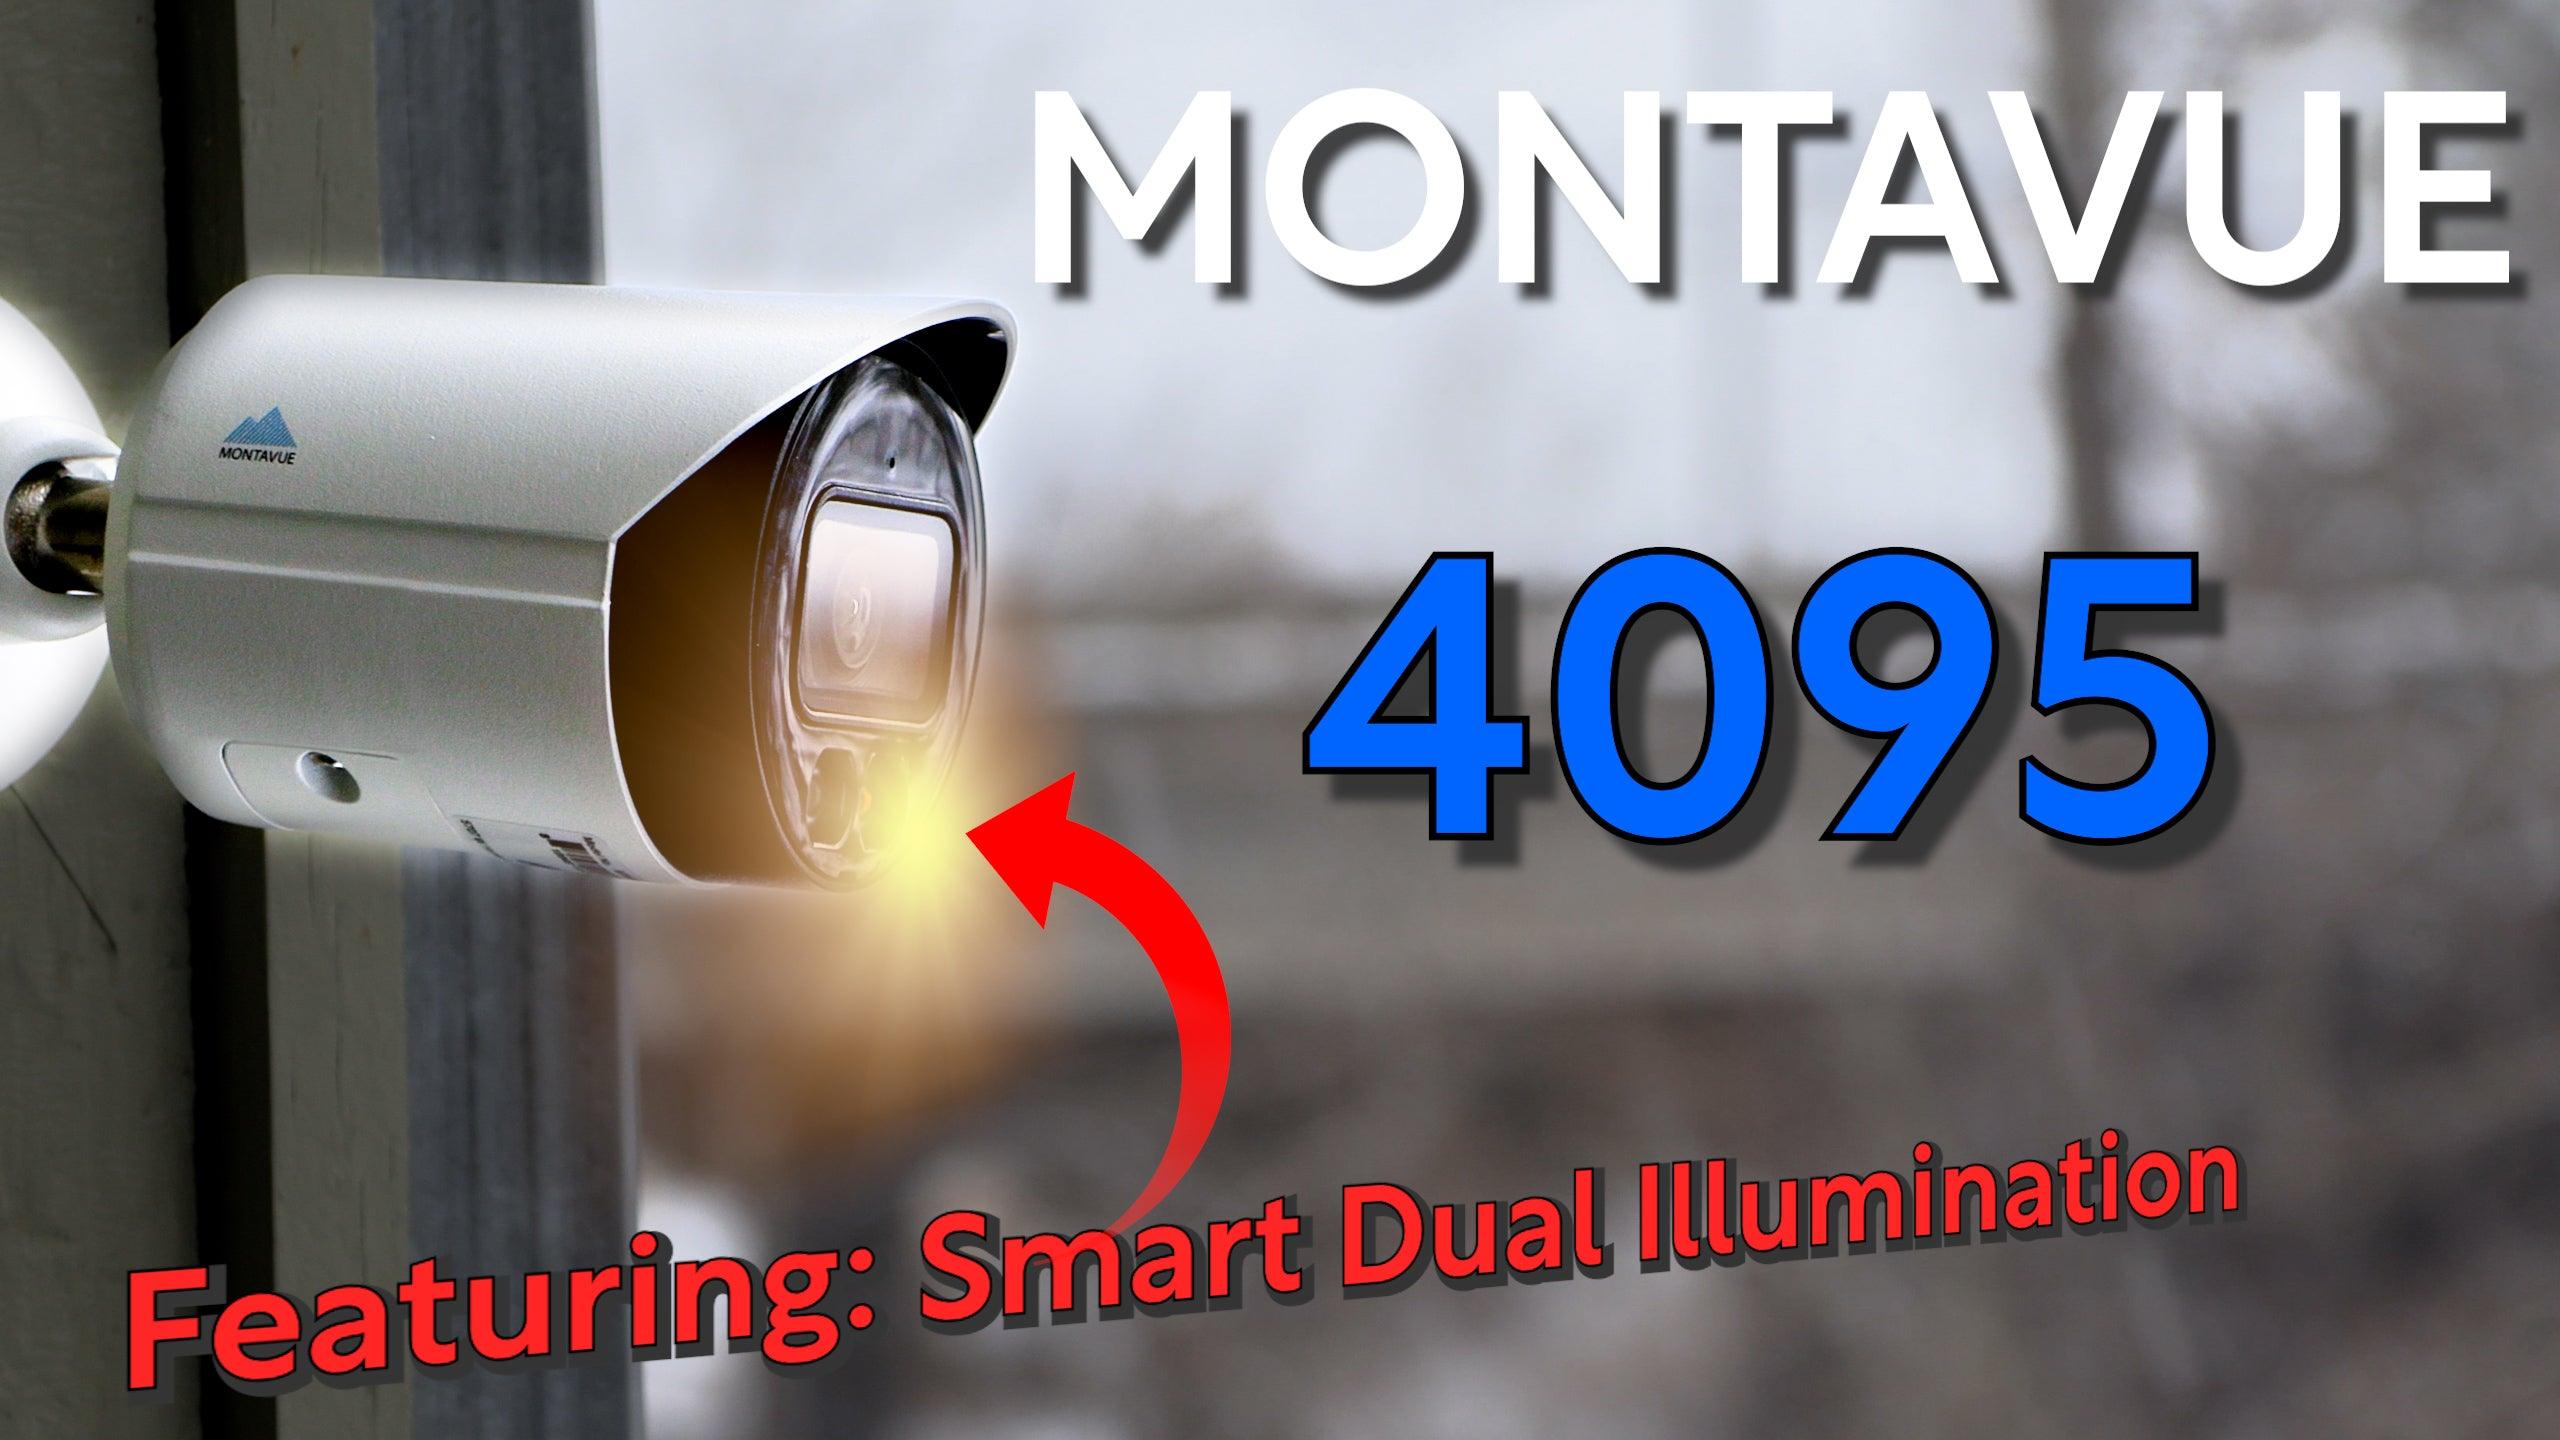 Montavue MTT4095 Affordable 2K Security Camera with Smart Dual Illumination and Artificial Intelligence - Montavue